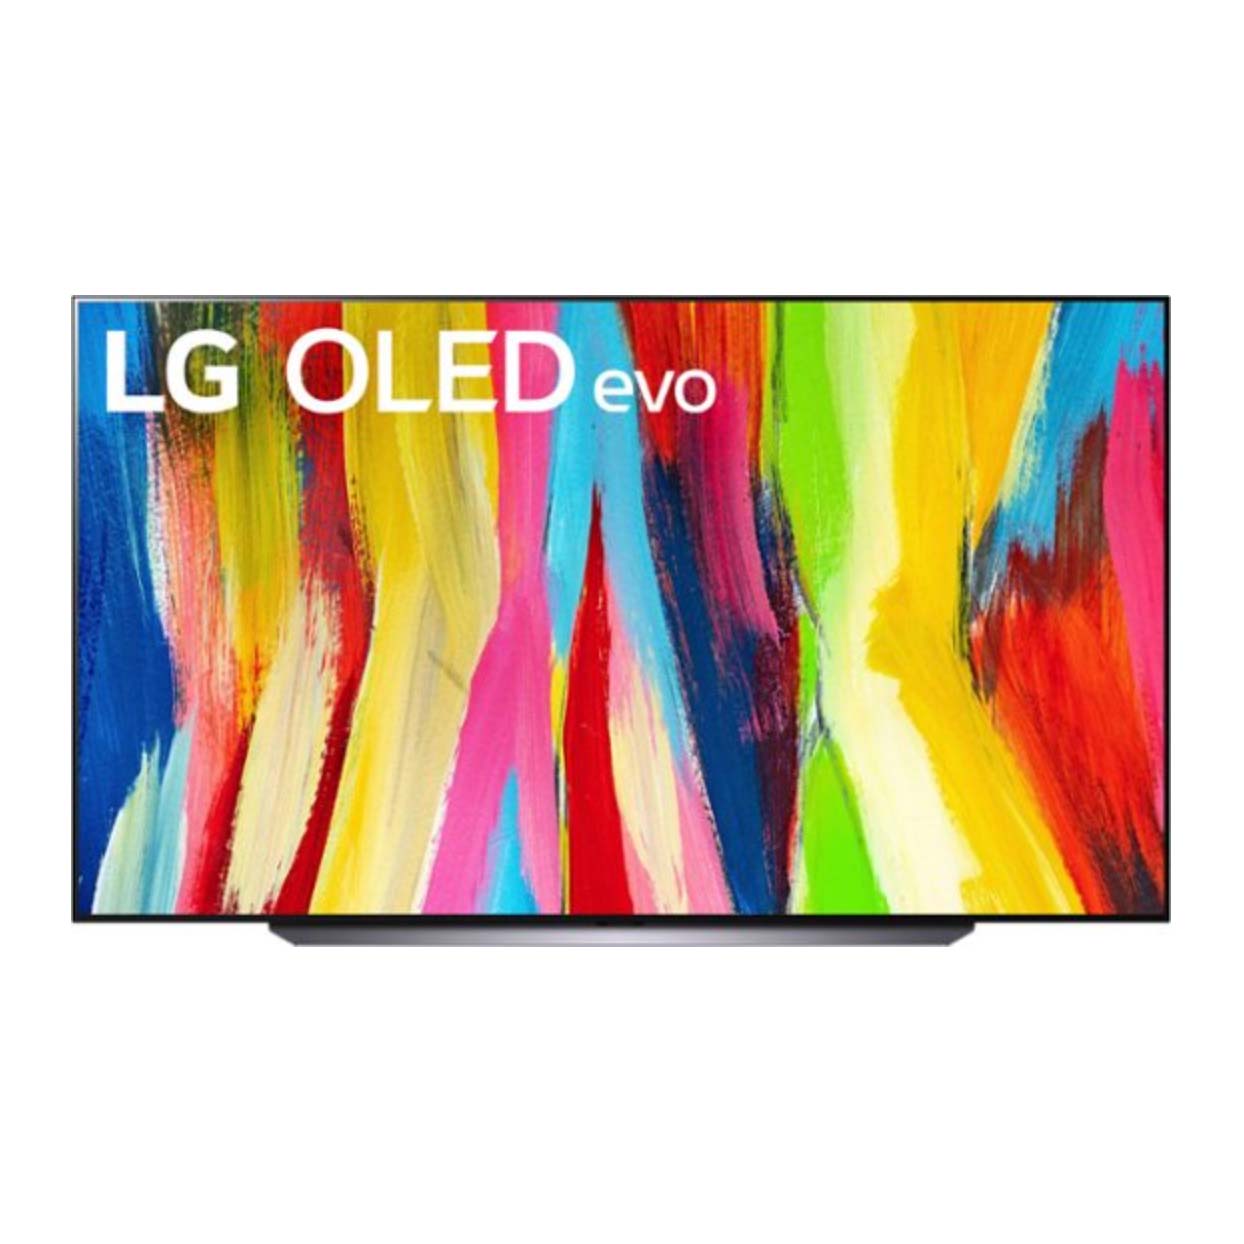 LG 83-inch TV with screen display